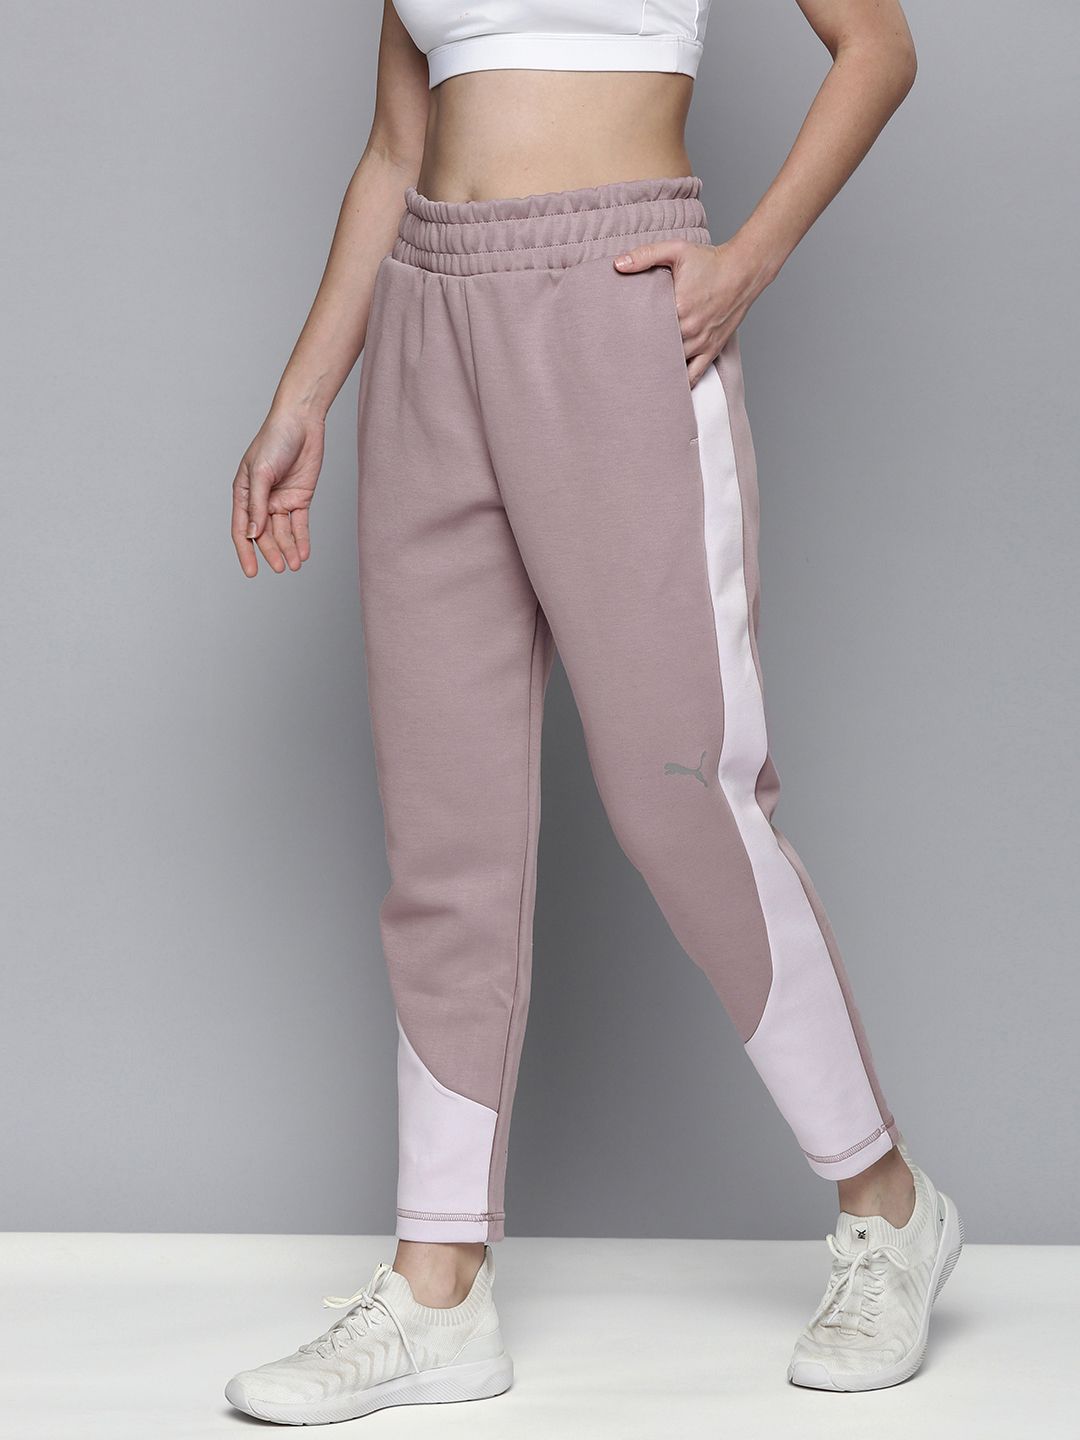 Puma Women Quail Violet & White Solid dryCell Technology Sides Evostripe Sustainable Sustainable Track Pants Price in India